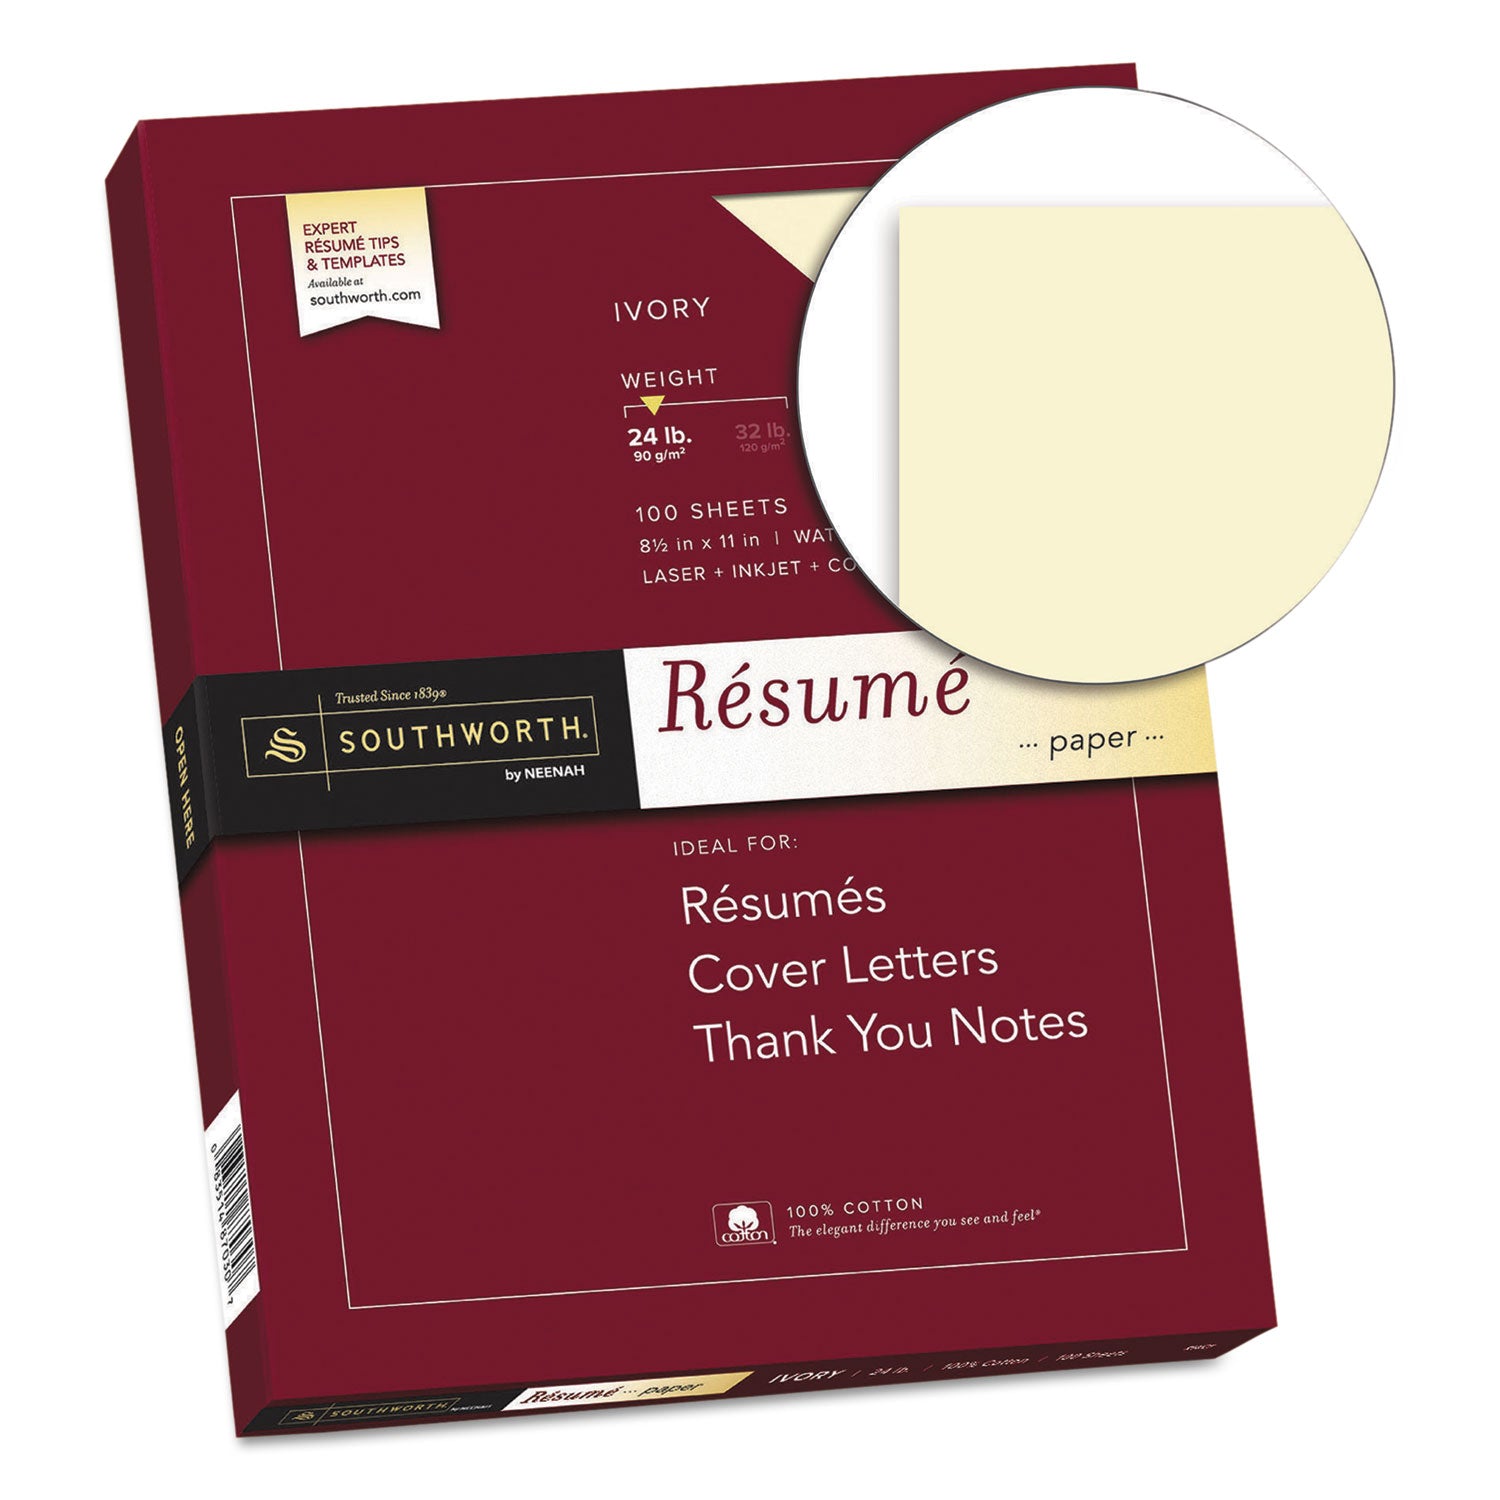 100% Cotton Resume Paper, 24 lb Bond Weight, 8.5 x 11, Ivory, 100/Pack - 